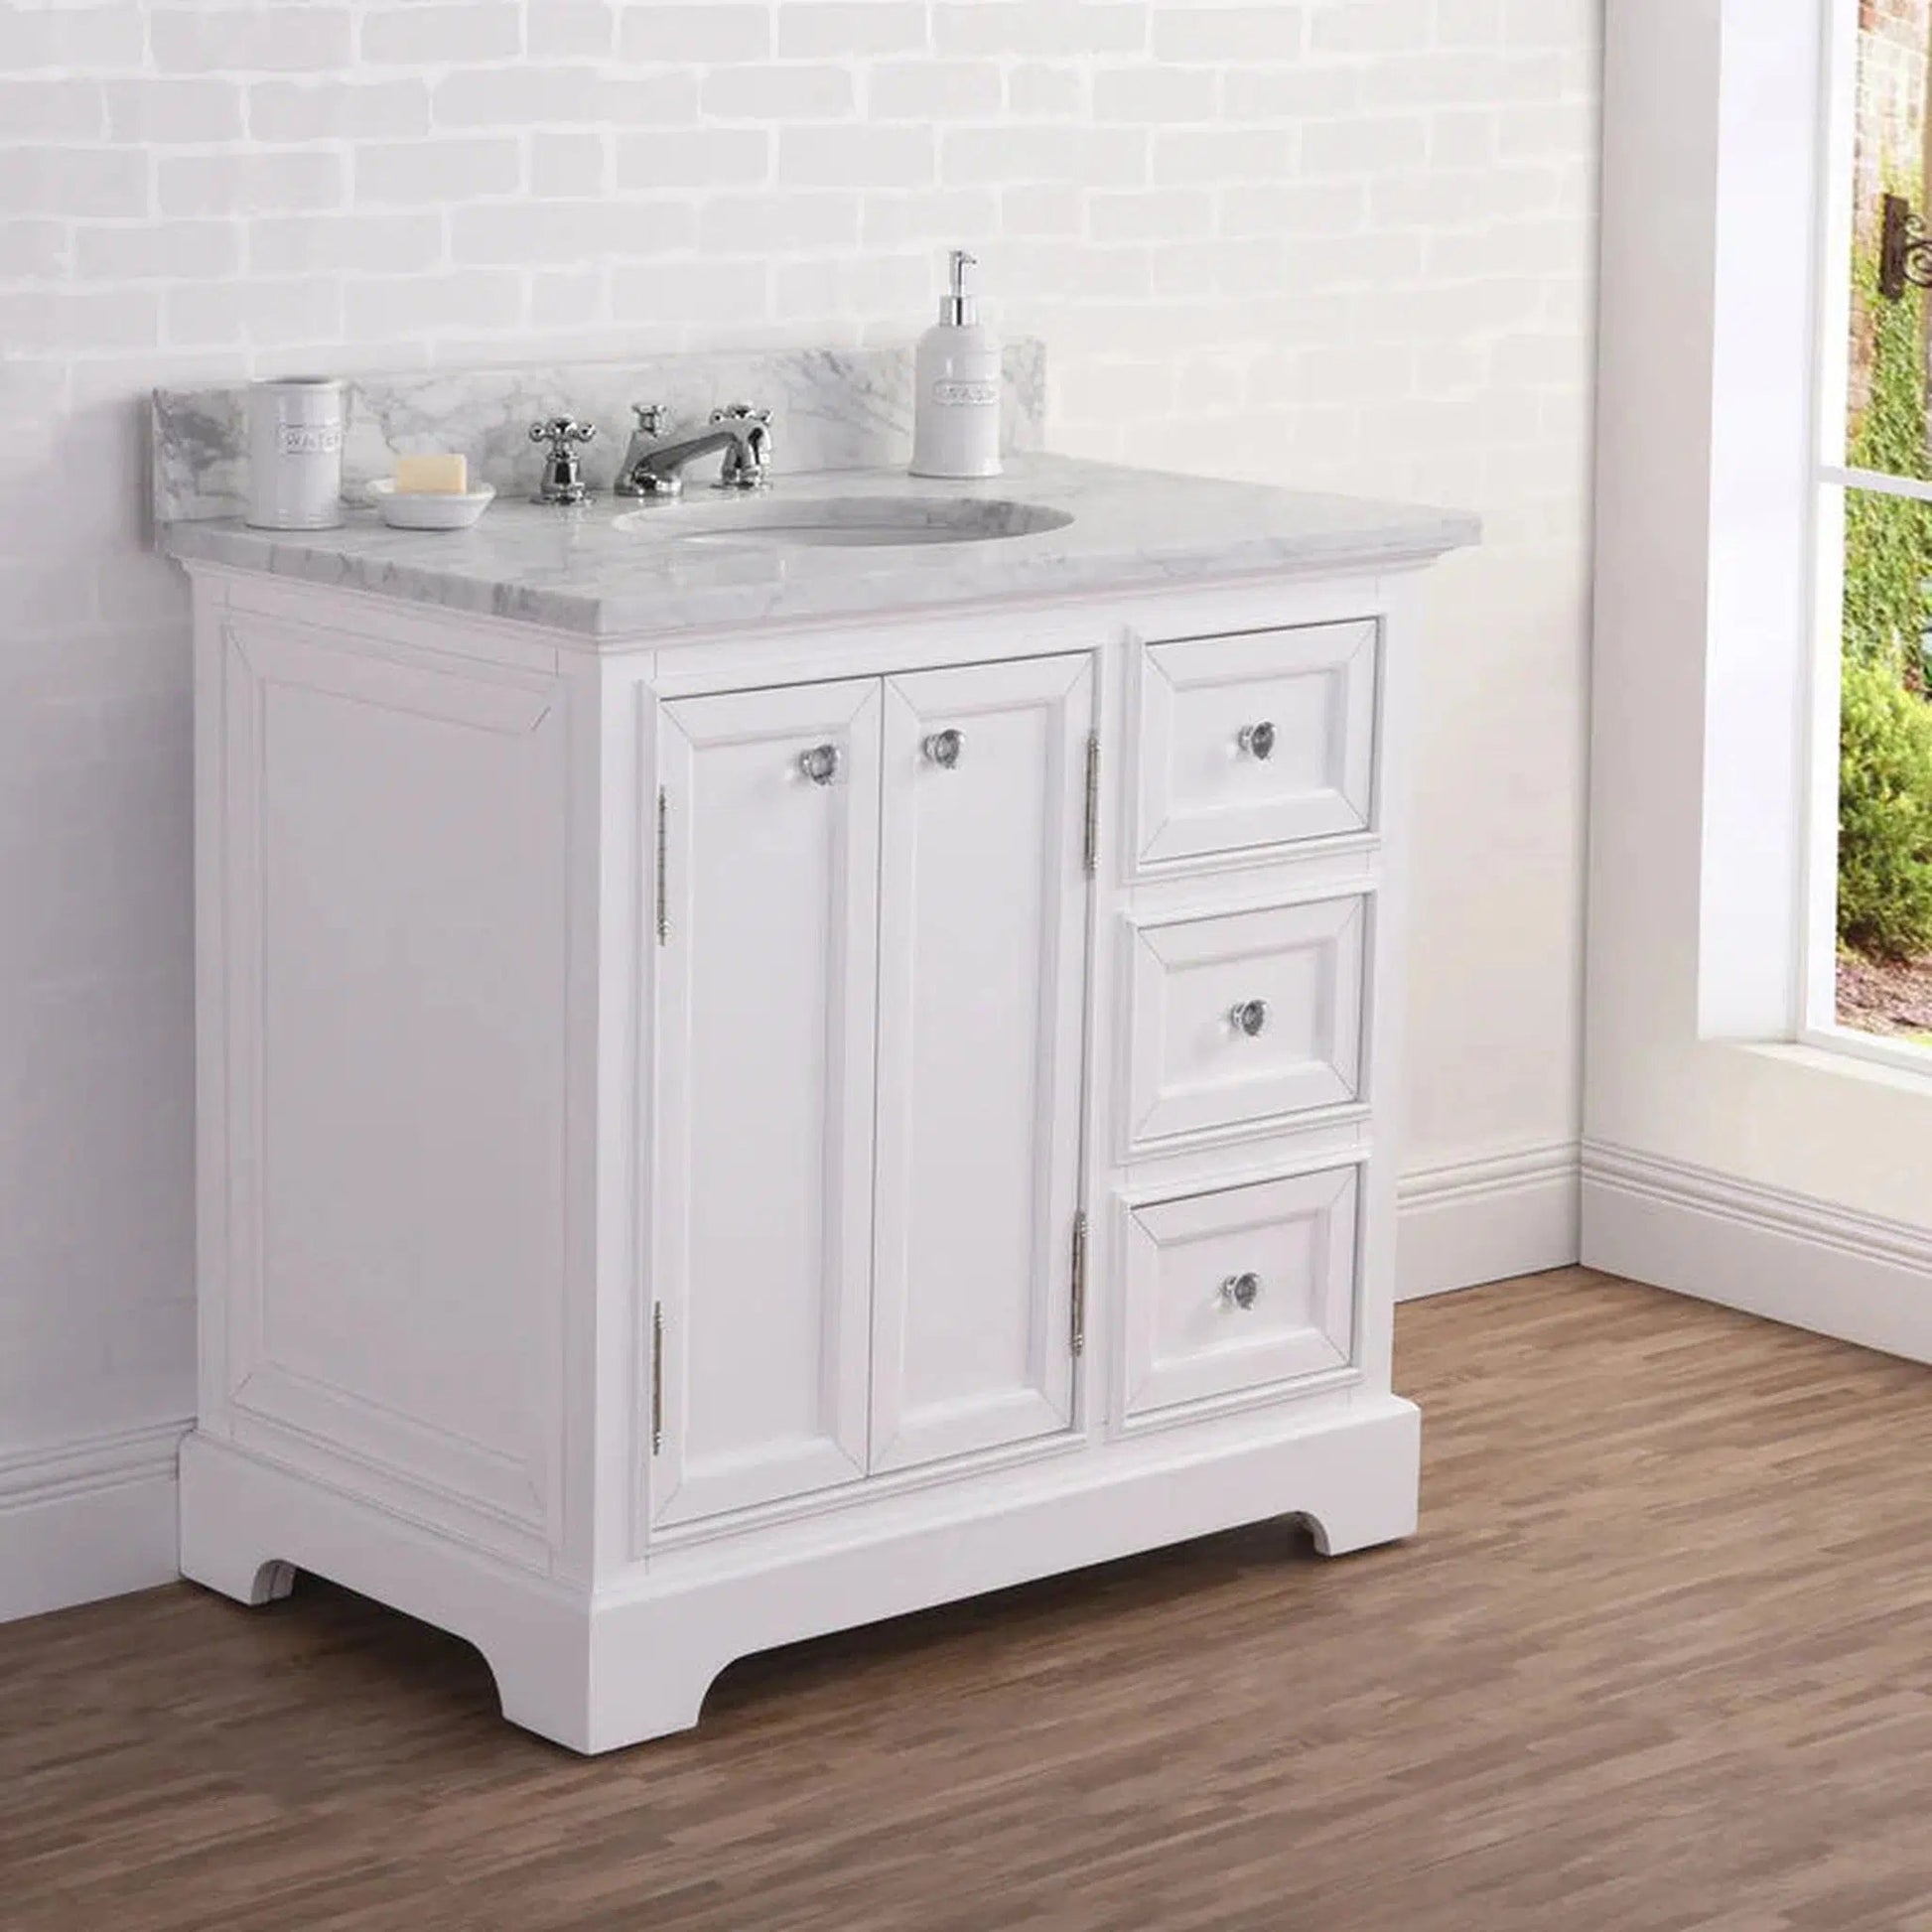 Water Creation 36 Inch Wide Cashmere Grey Single Sink Carrara Marble Bathroom Vanity With Matching Mirror And Faucet(s) From The Derby Collection